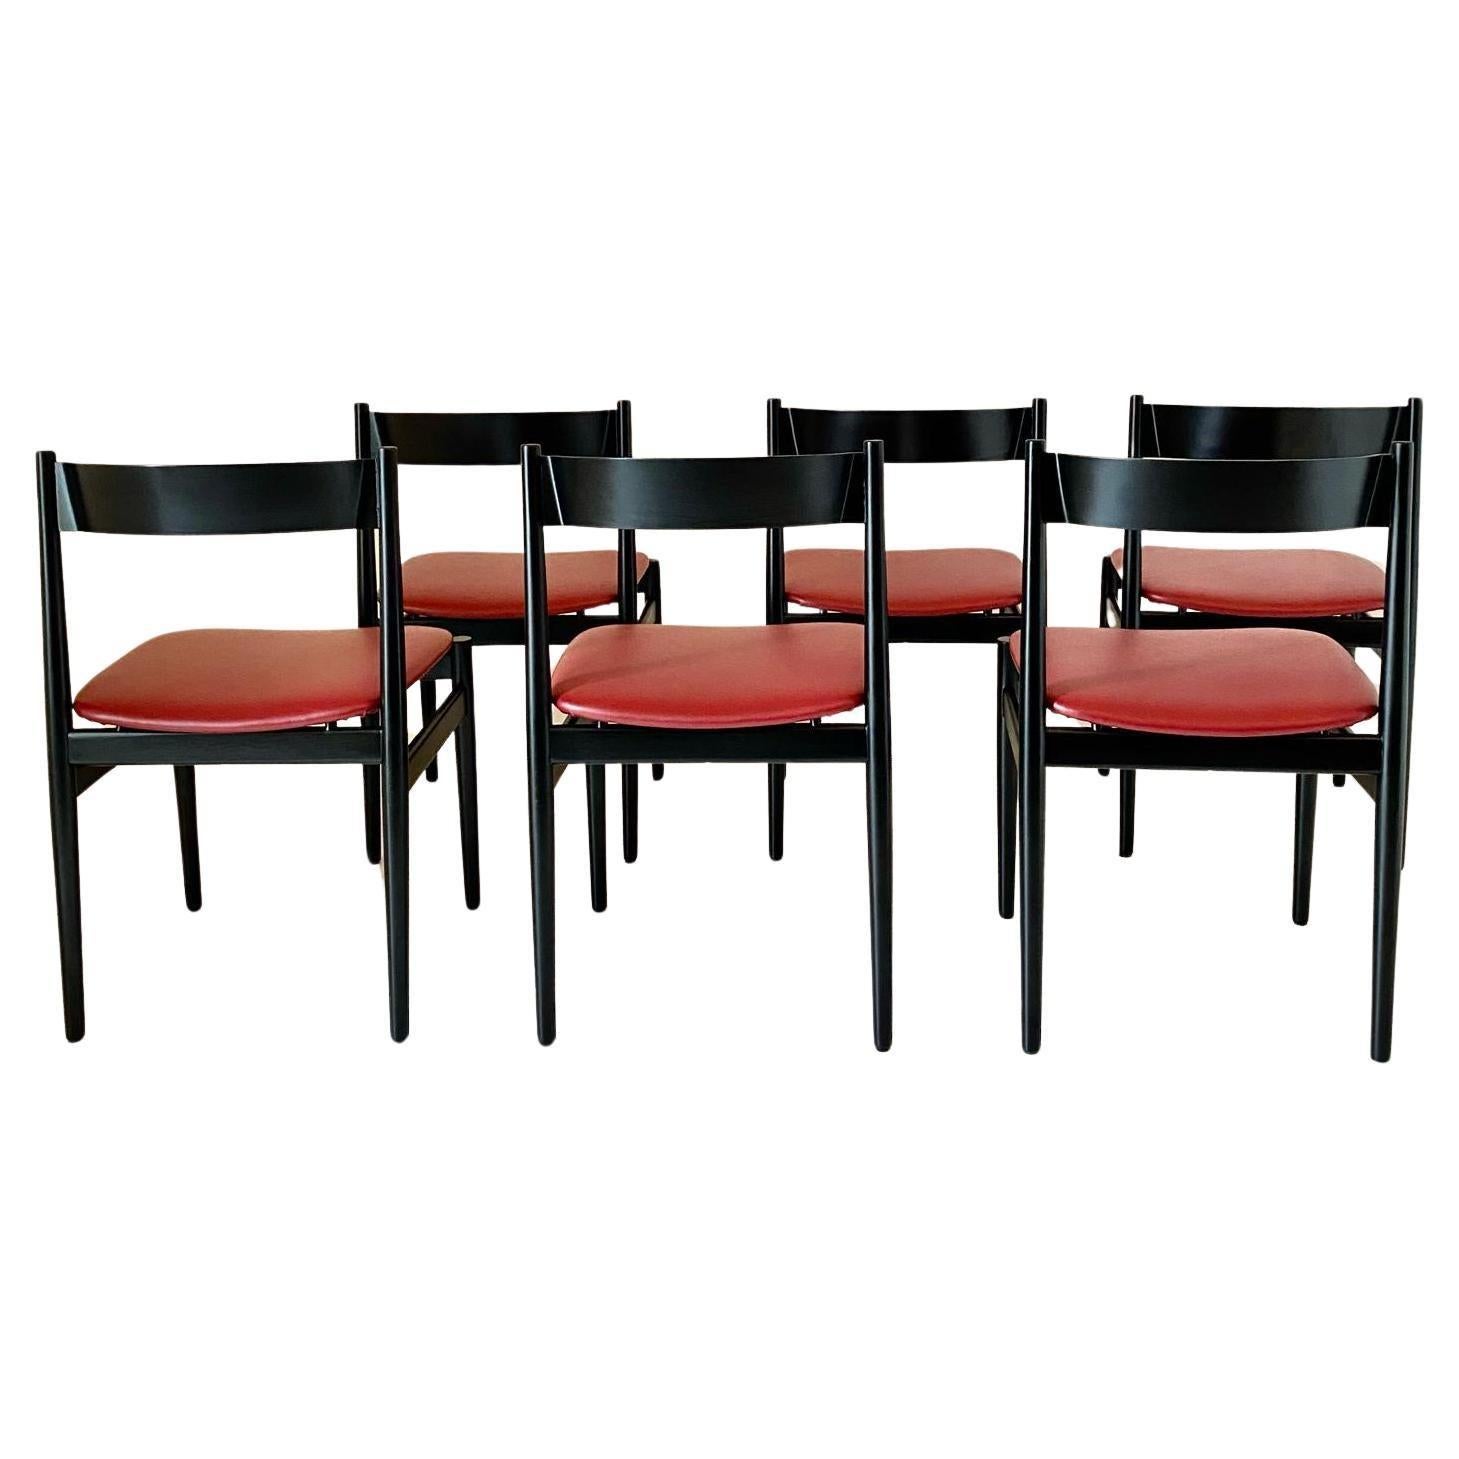 Mid-20th Century Mid Century Modern Dining Chairs, Gianfranco Frattini for Cassina, Italy 1960 's For Sale